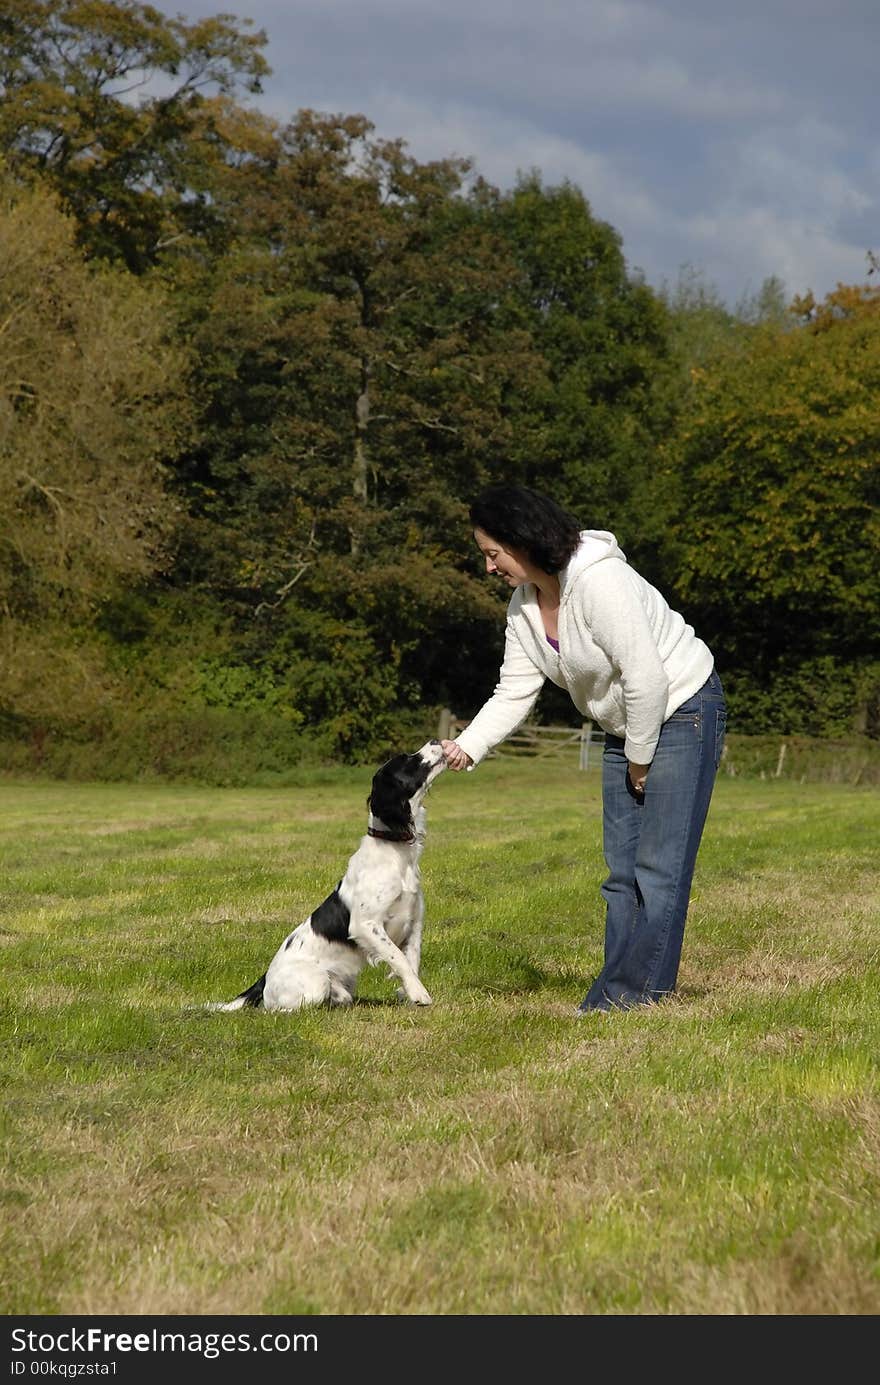 English springer spaniel being trained in a field by its young lady owner on a nice sunny day.